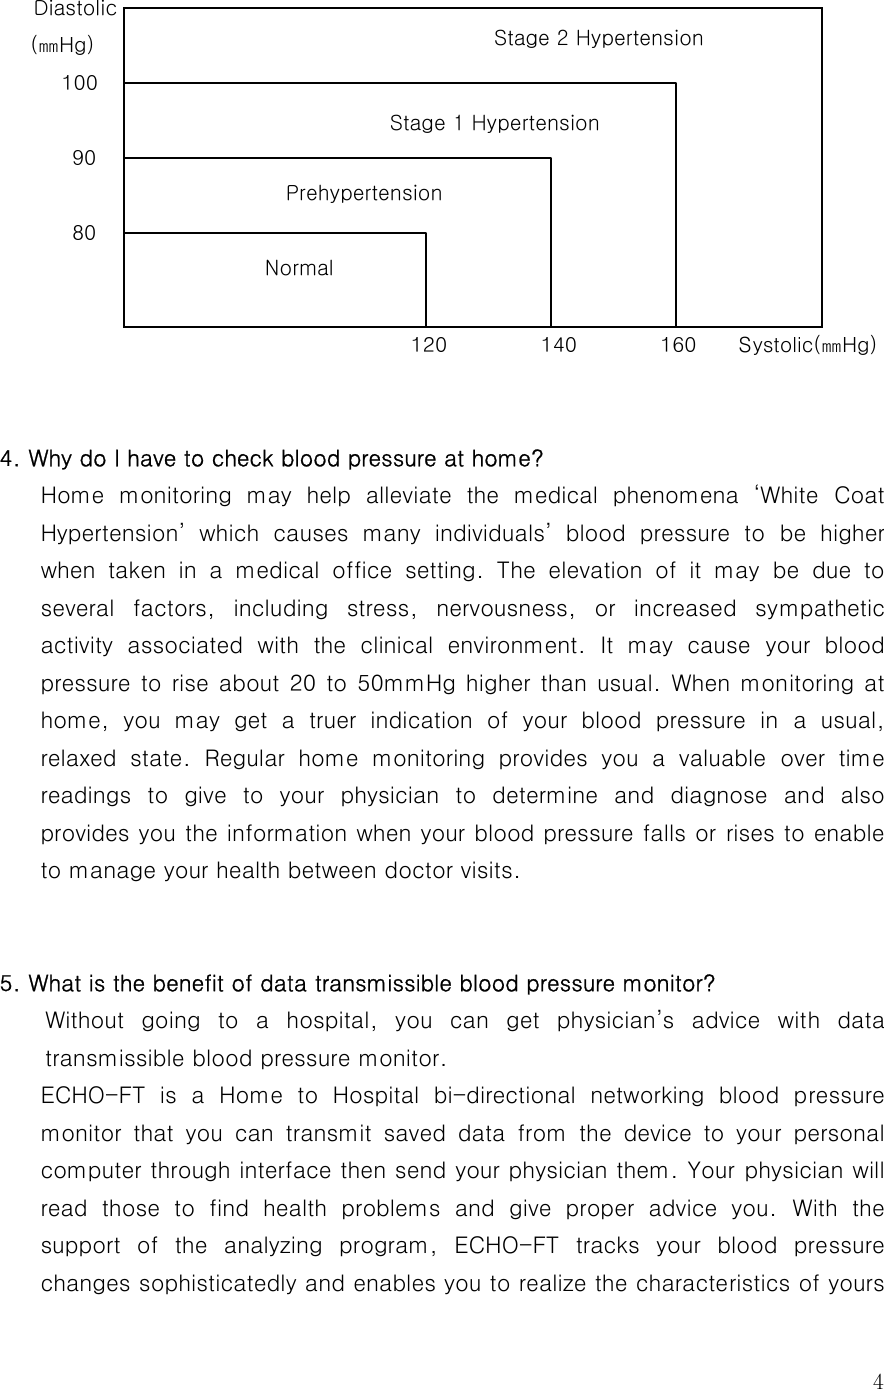  4    Diastolic    (㎜Hg)                           100                90                             80                                   120         140        160    Systolic(㎜Hg)   4. Why do I have to check blood pressure at home? Home  monitoring  may  help  alleviate  the  medical  phenomena  ‘White Coat Hypertension’ which causes many individuals’ blood pressure to be  higher when  taken  in  a  medical  office  setting.  The  elevation  of  it  may be due to several  factors,  including  stress,  nervousness,  or  increased  sympathetic activity  associated  with  the  clinical  environment.  It  may  cause  your  blood pressure to rise about 20 to 50mmHg higher than usual. When monitoring at home,  you  may  get  a  truer  indication  of  your  blood  pressure  in  a  usual, relaxed  state.  Regular  home  monitoring  provides  you  a  valuable  over  time readings to give to your physician to determine and diagnose and  also provides you the information when your blood pressure falls or rises to enable to manage your health between doctor visits.   5. What is the benefit of data transmissible blood pressure monitor? Without going to a hospital, you can get physician’s advice with  data transmissible blood pressure monitor.   ECHO-FT  is  a  Home  to  Hospital  bi-directional  networking  blood  pressure monitor that you can transmit saved data from the device to your  personal computer through interface then send your physician them. Your physician will read those to find health problems and give proper advice you. With  the support of the analyzing program, ECHO-FT tracks your blood pressure changes sophisticatedly and enables you to realize the characteristics of yours Stage 2 Hypertension  Stage 1 Hypertension  Prehypertension  Normal 